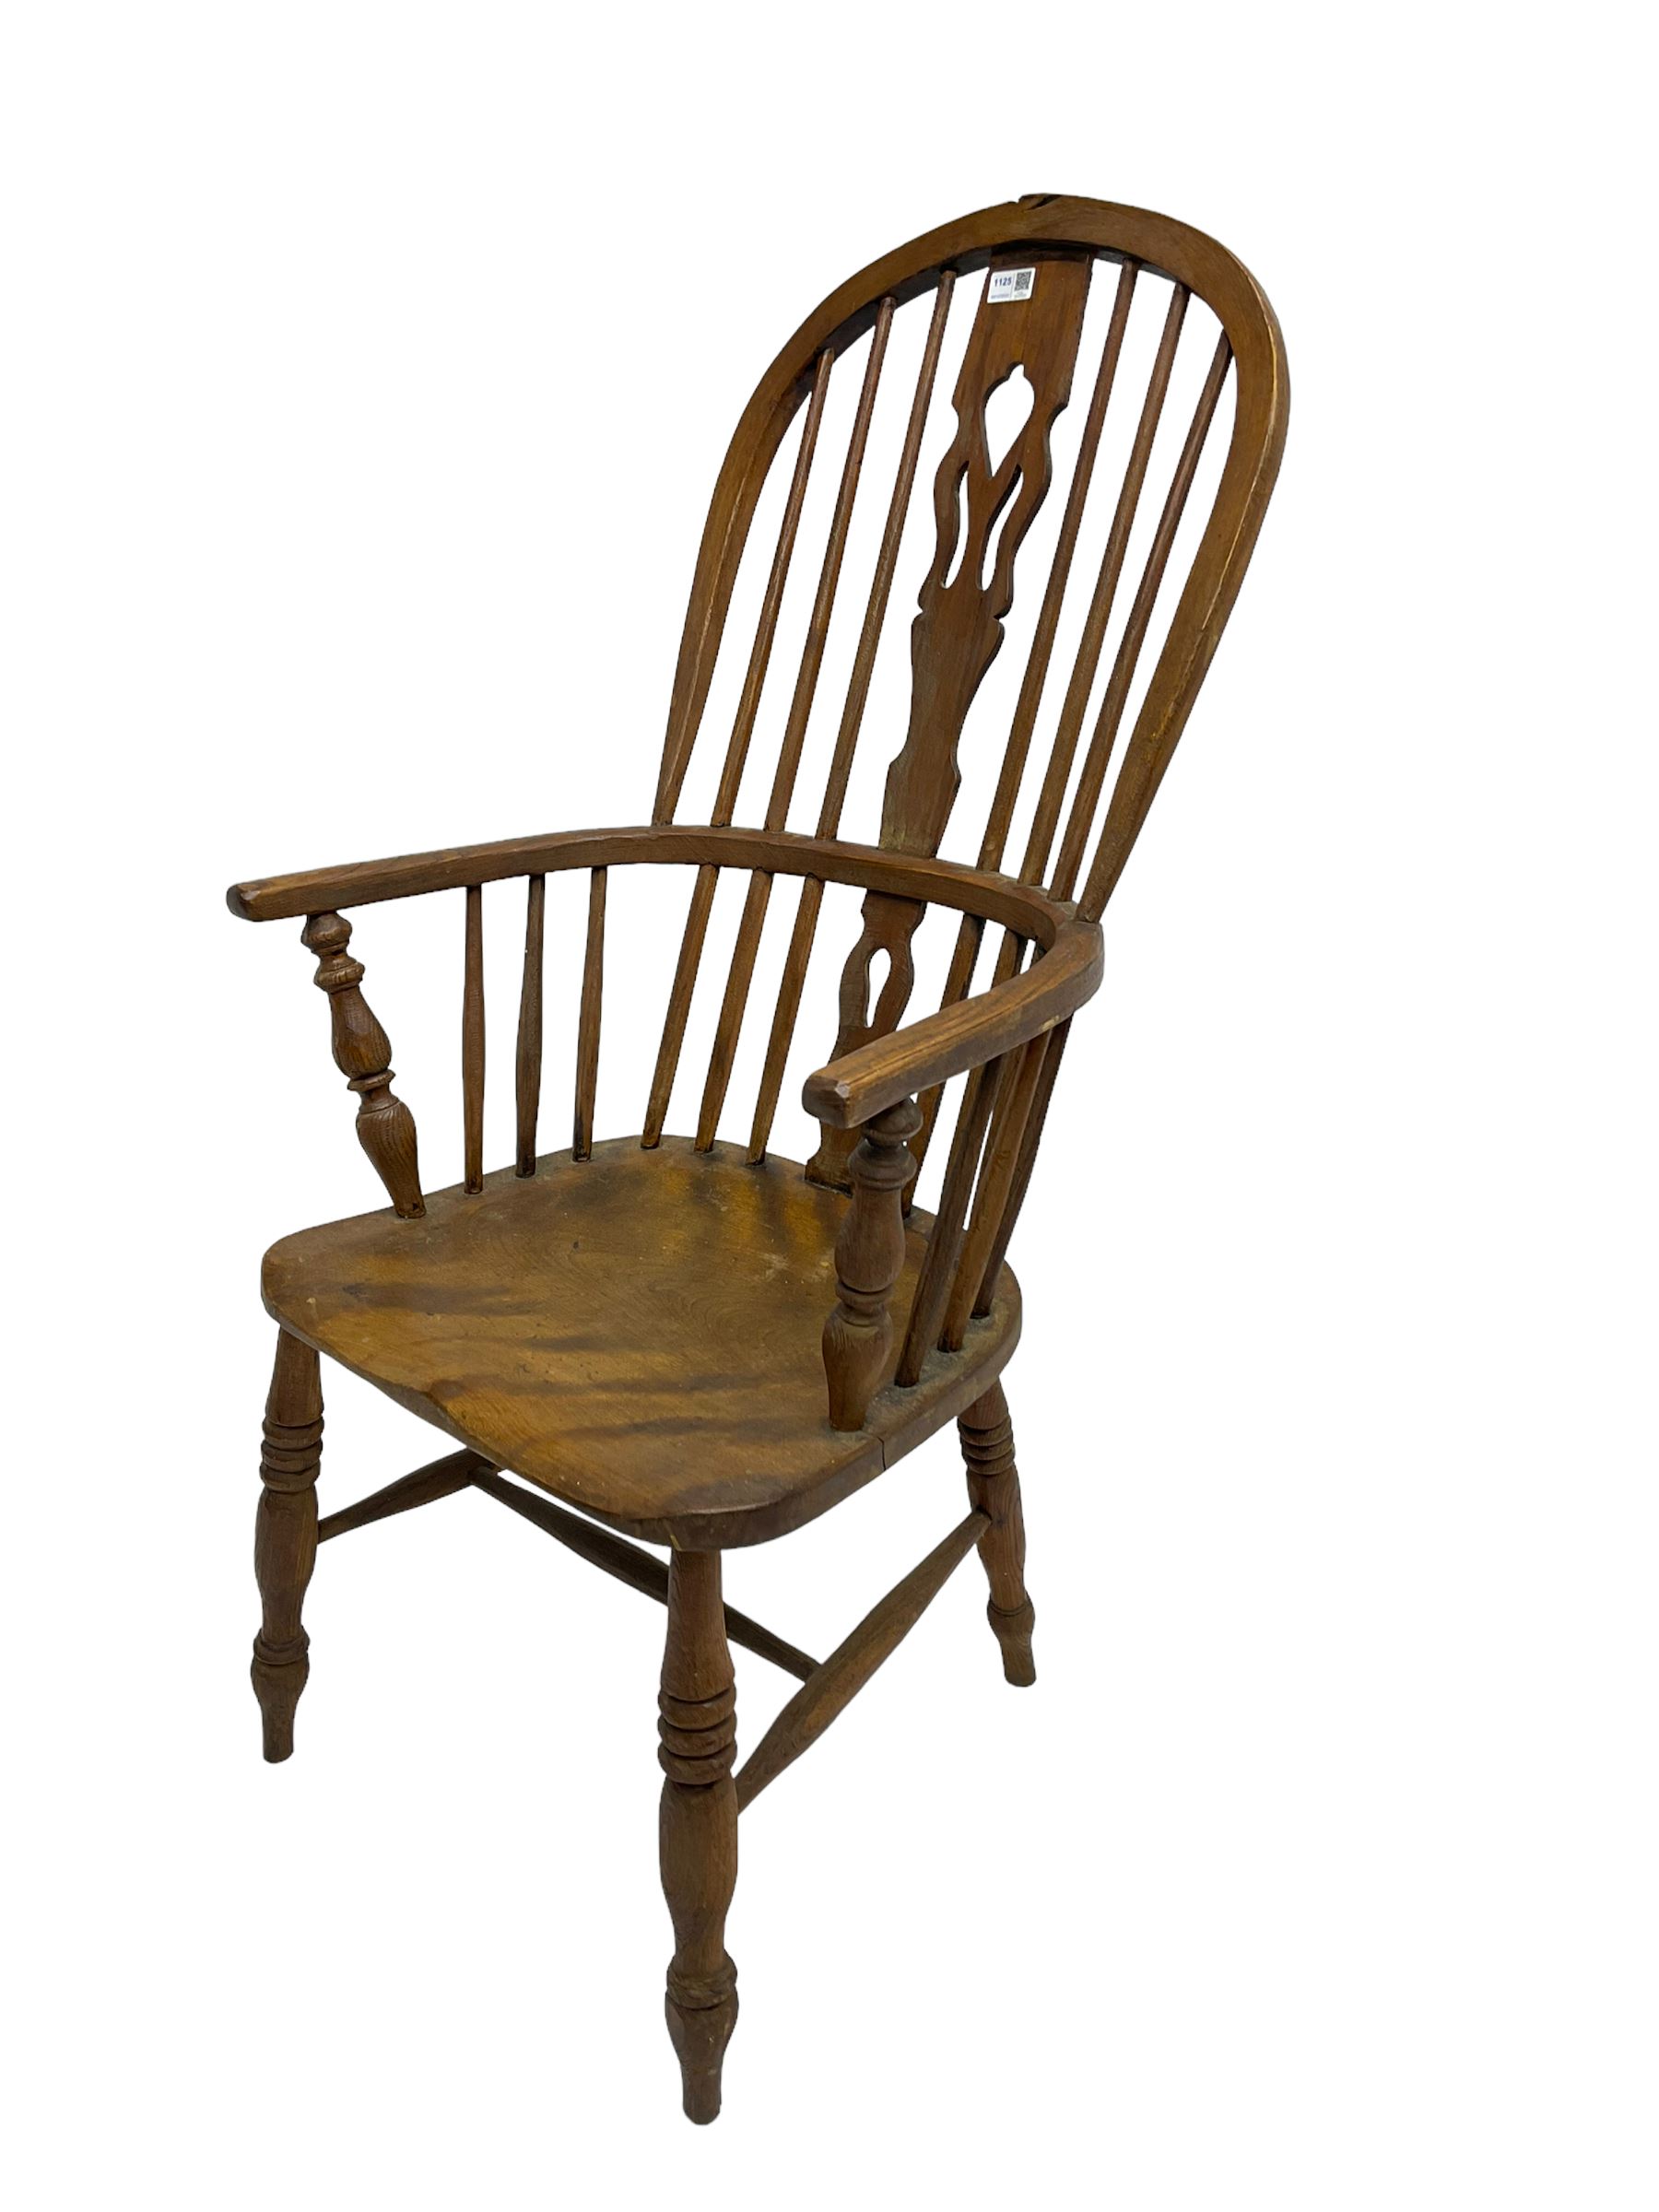 19th century elm and beech Windsor armchair - Image 3 of 6